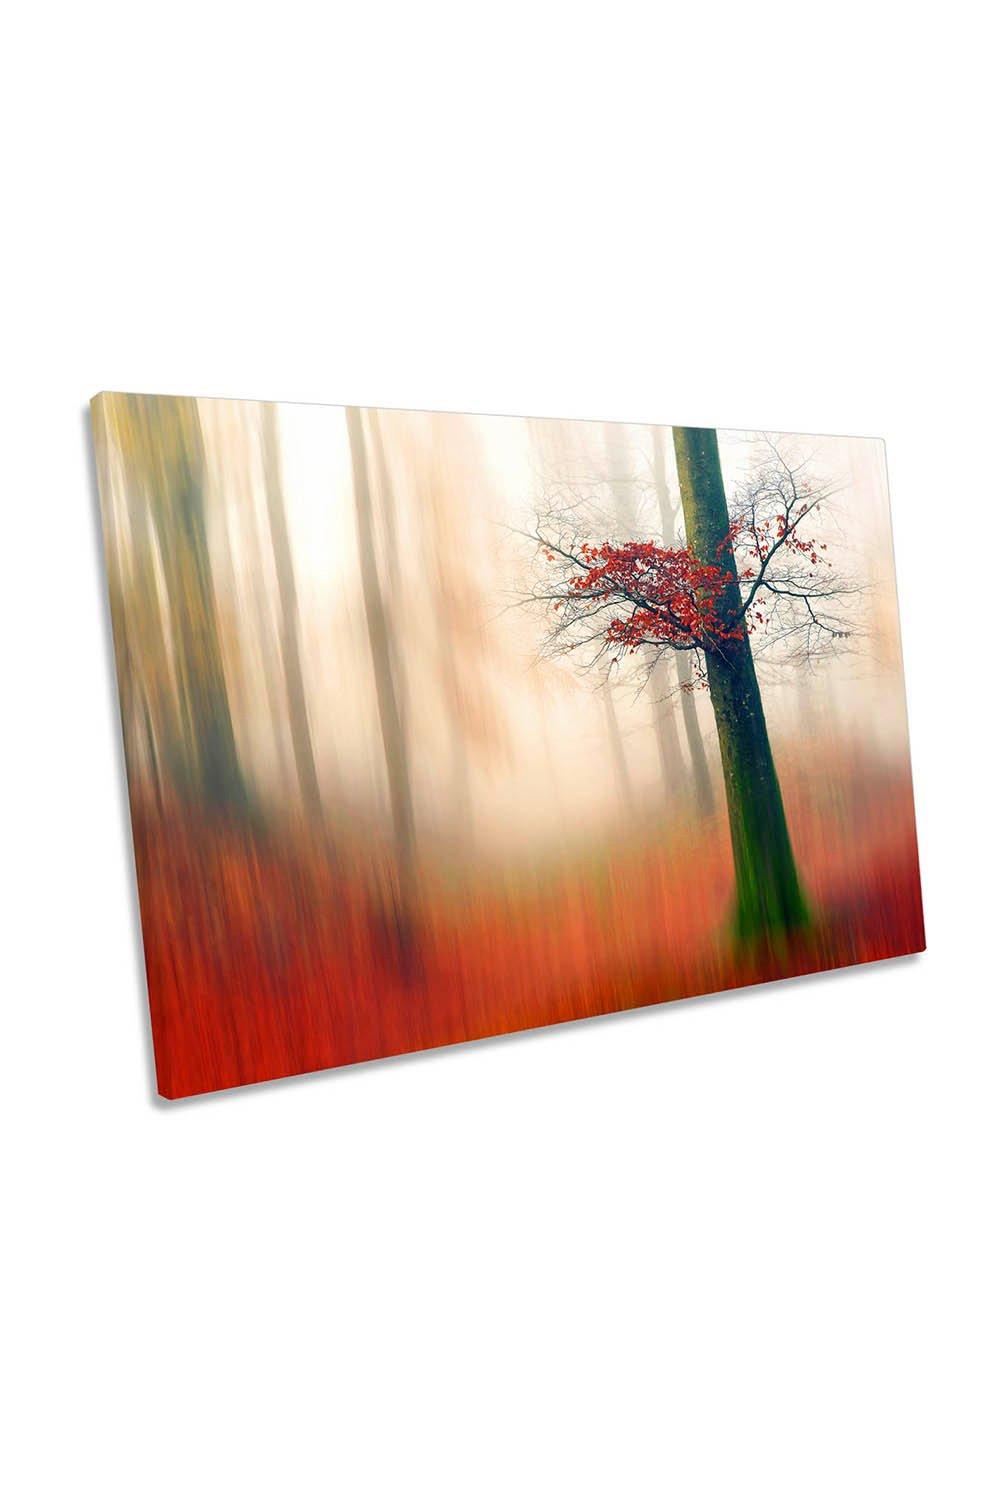 Red Leaves Forest Abstract Autumn Canvas Wall Art Picture Print